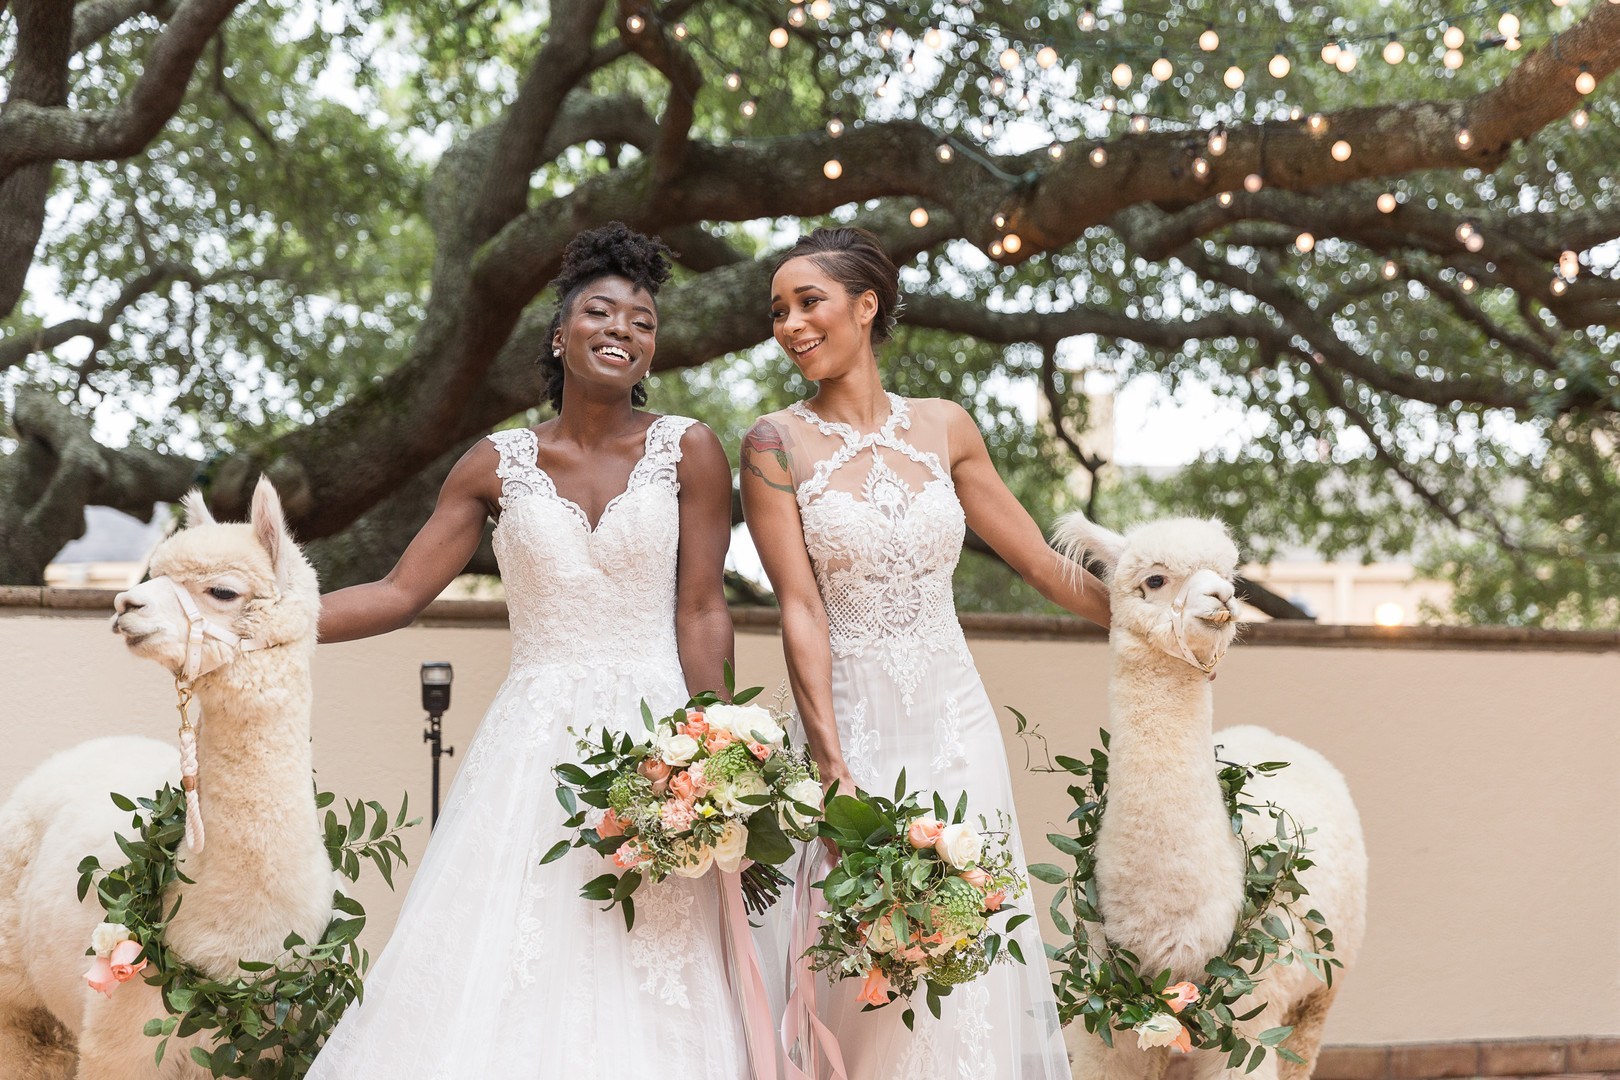 Look at these two amazing brides and two white alpacas with floral collars   aren't they gorgeous